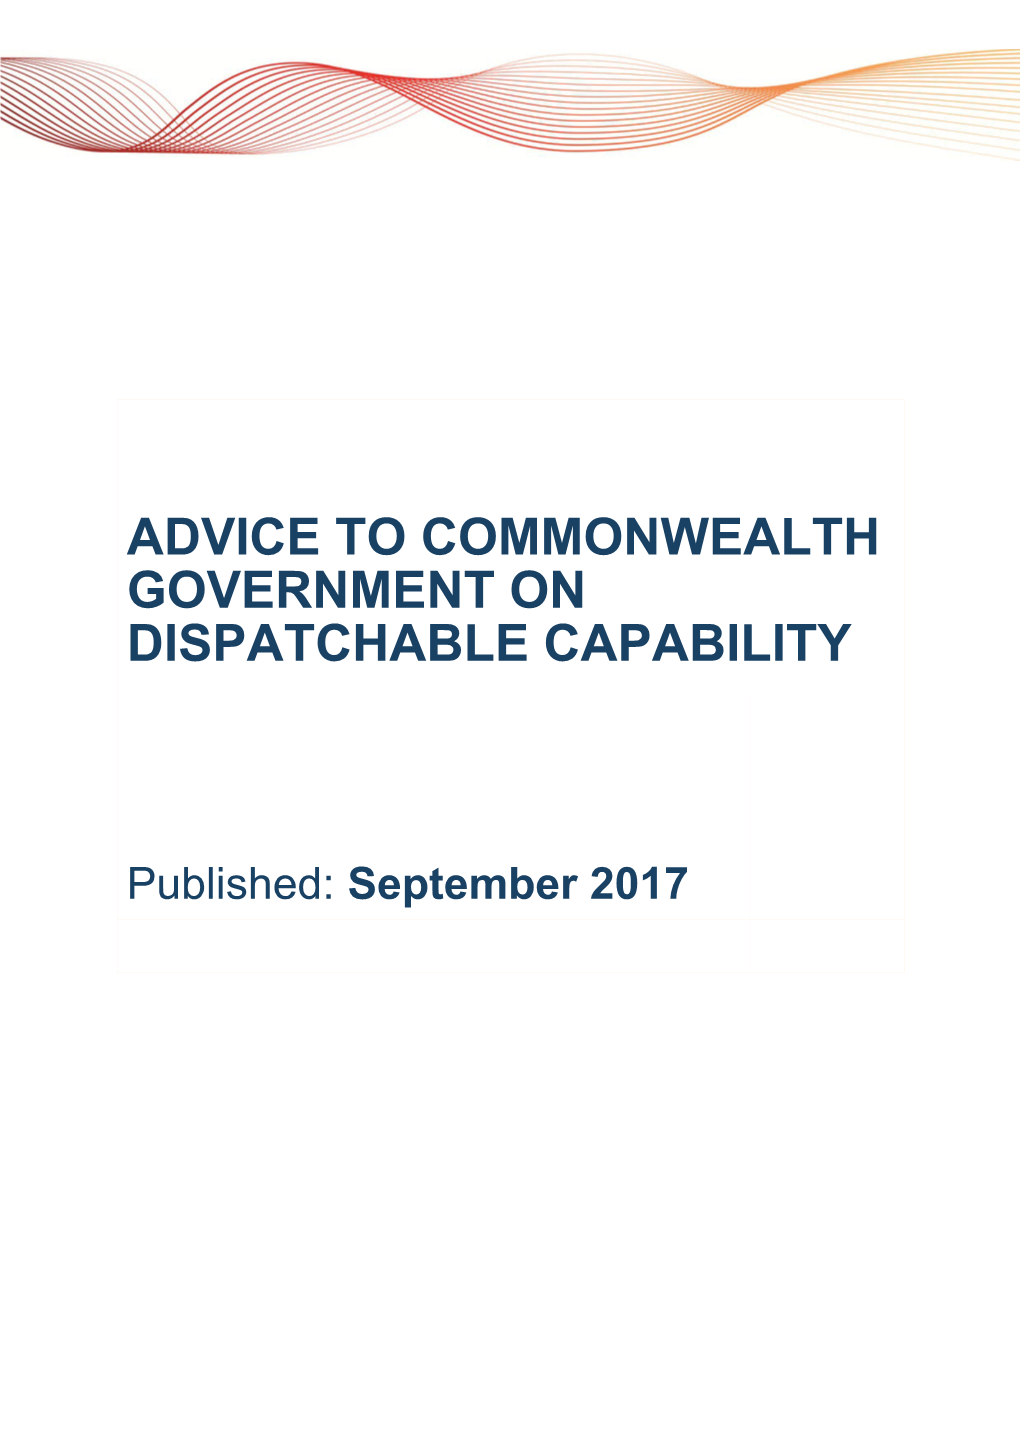 Advice to Commonwealth Government on Dispatchable Capability